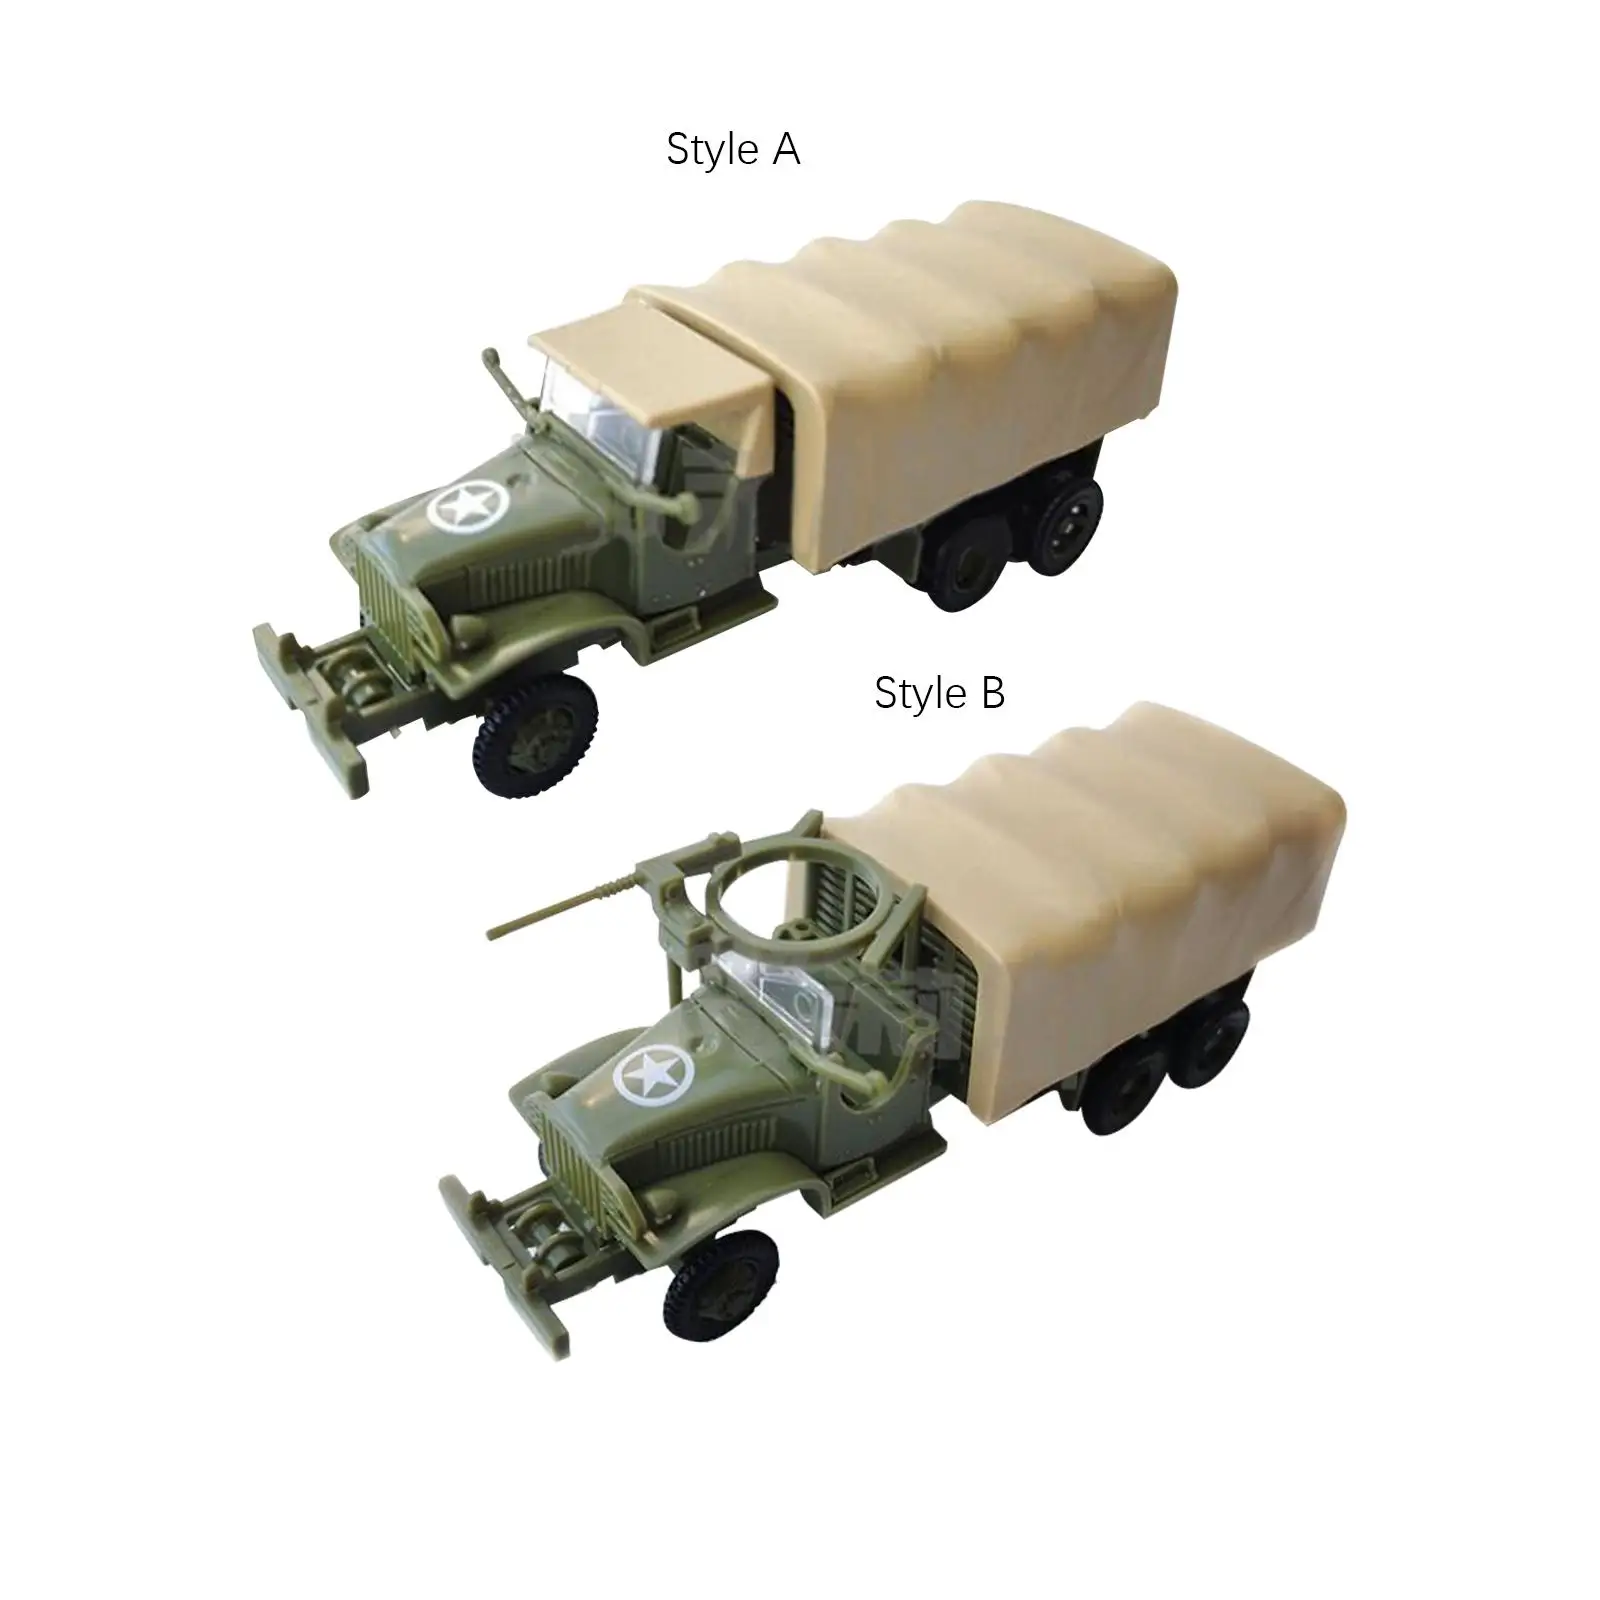 Simulation 1/72 Truck Model Kits Building Model Kits Collections Home Decoration DIY Assemble Car for Display Educational Kids